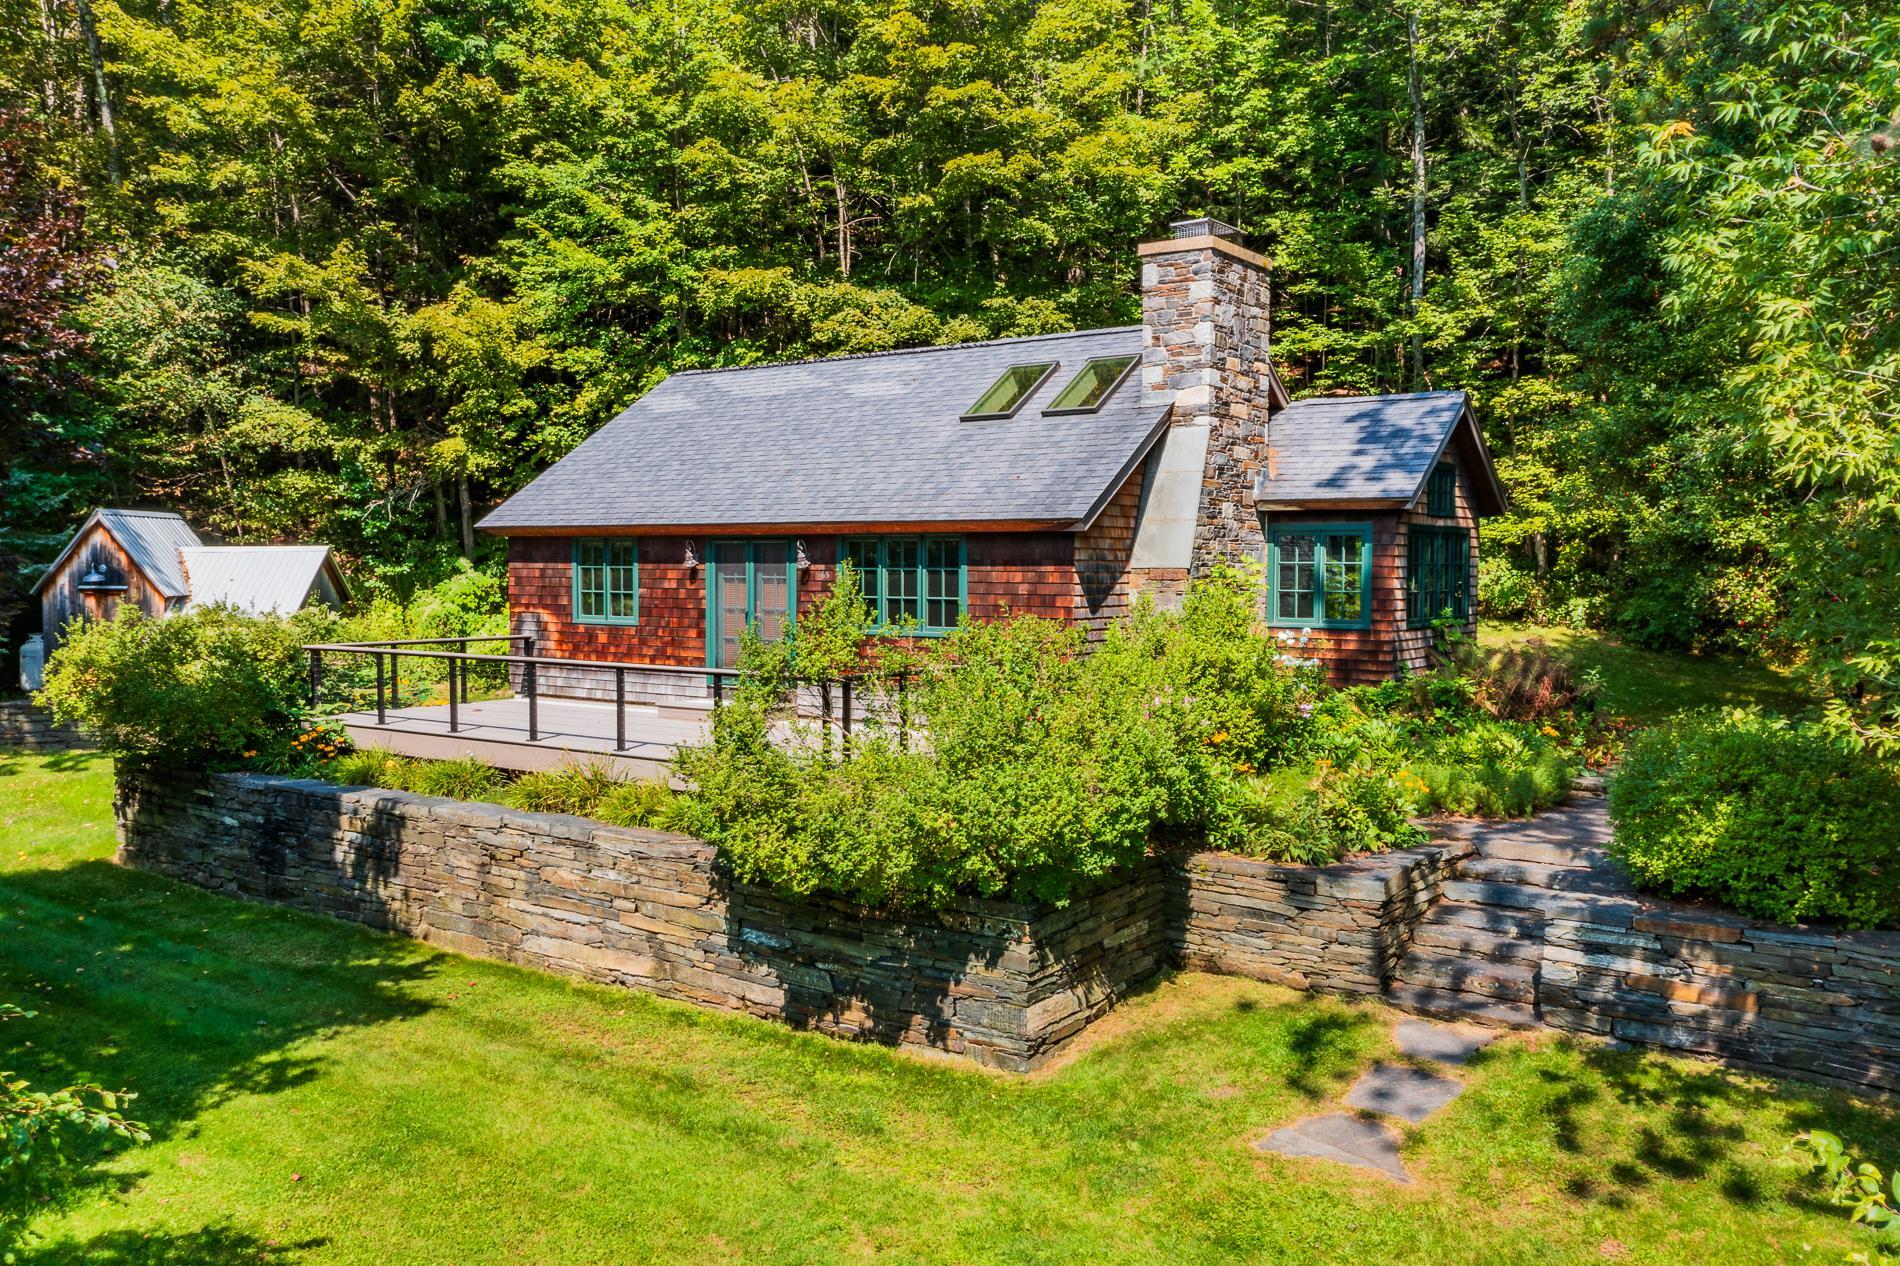 LYME NH Homes for sale